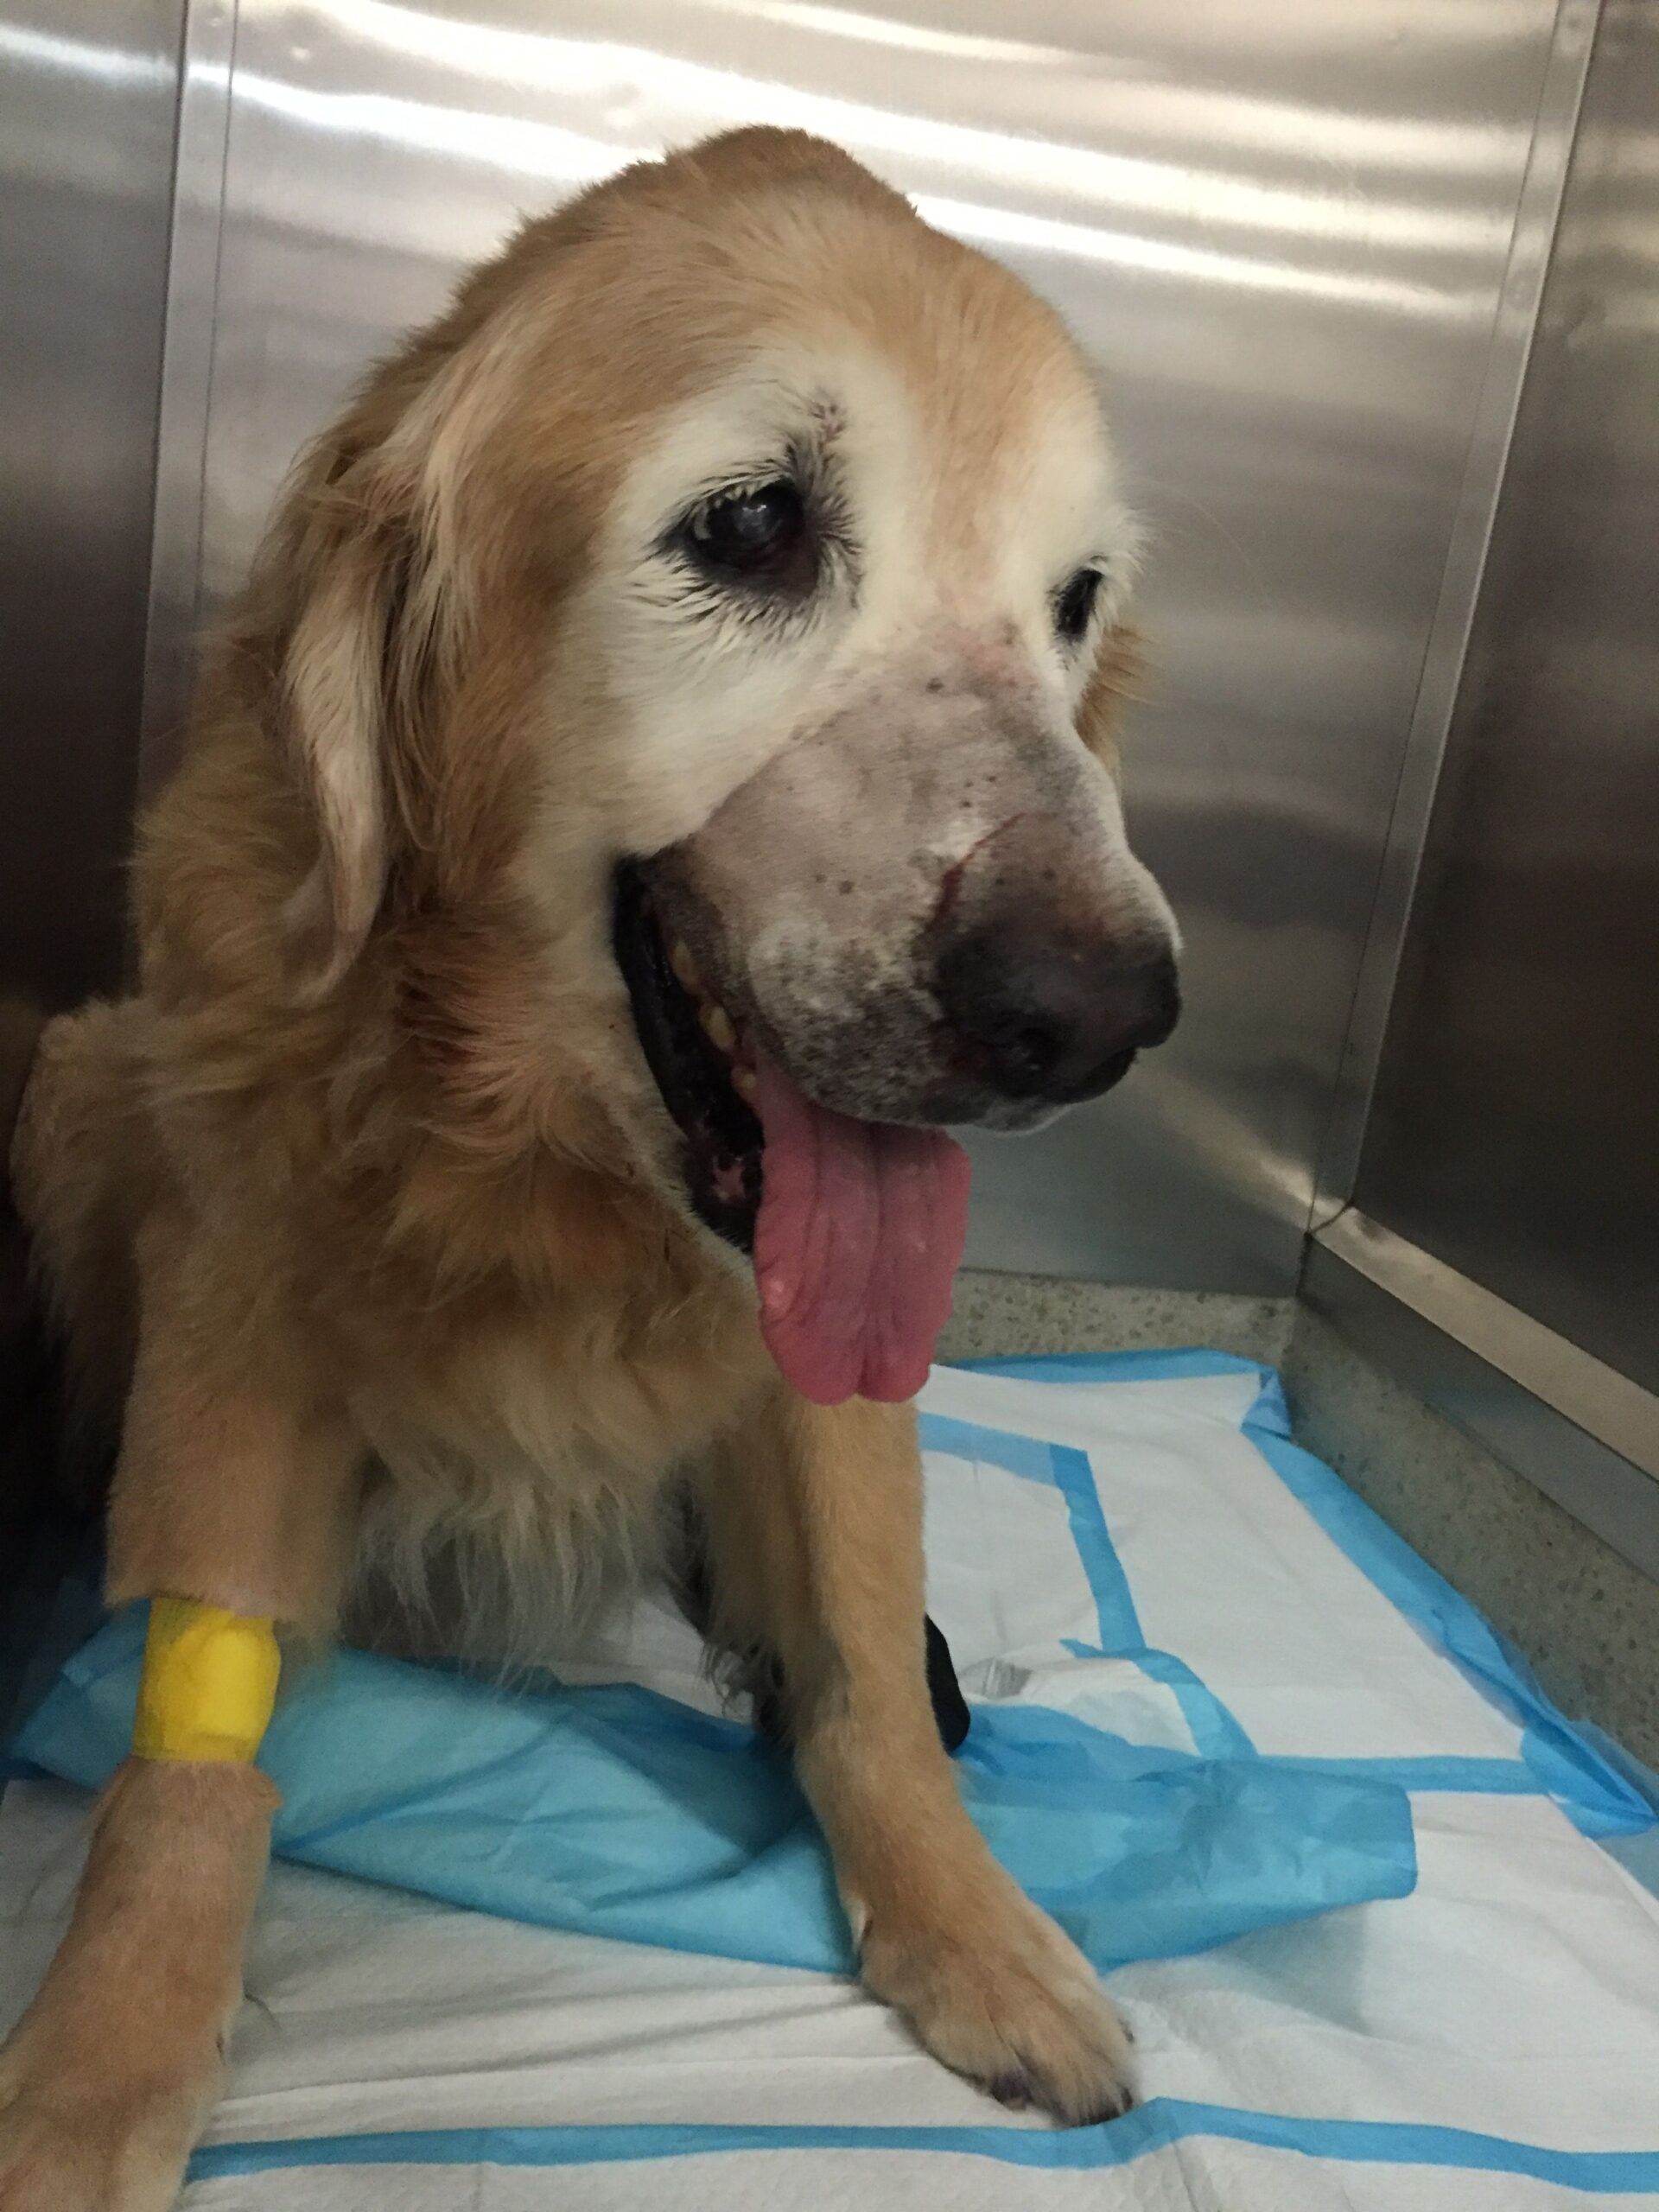 Berkeley the dog with tongue out and nose shaved after surgery